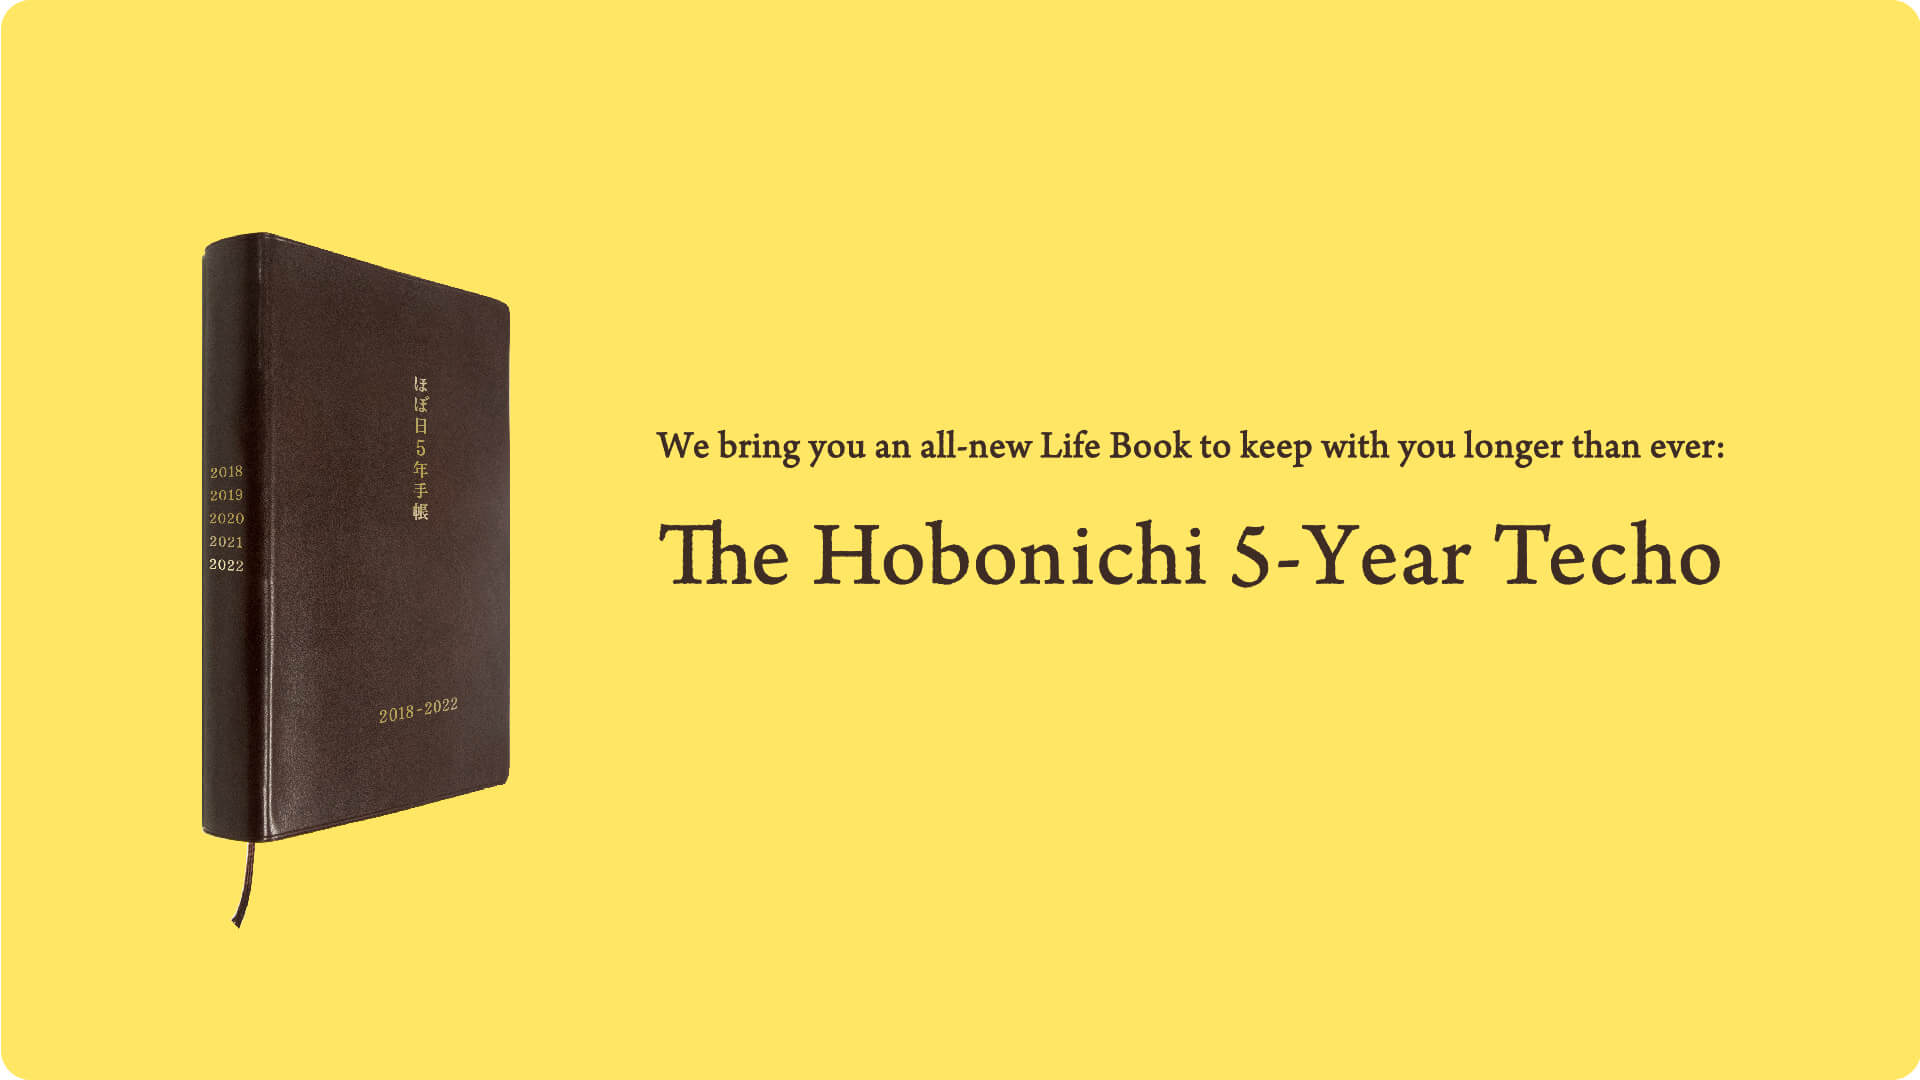 We bring you an all-new Life Book to keep with you longer than ever: The Hobonichi 5-Year Techo